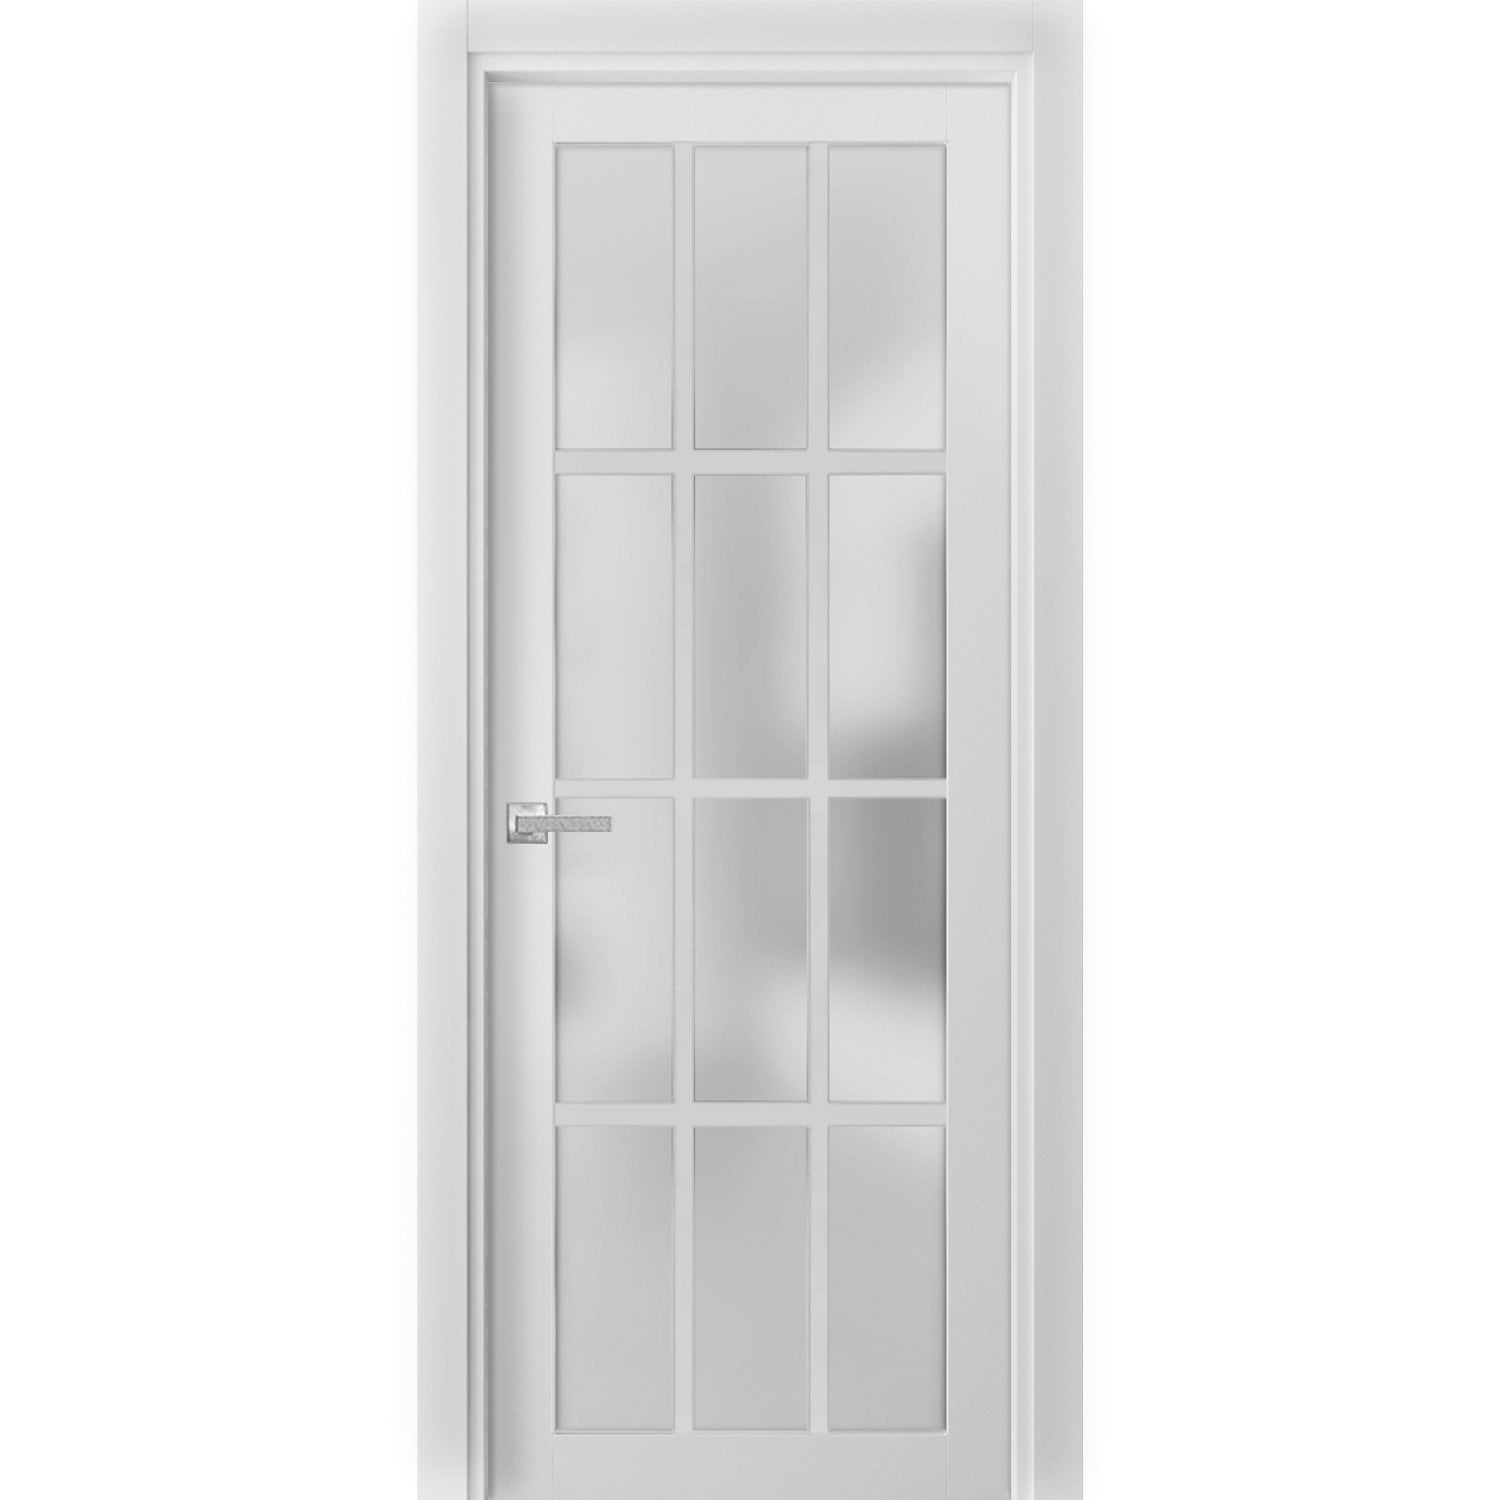  Sturdy Barn Door 30 x 80 inches Frosted Glass 2 Lites